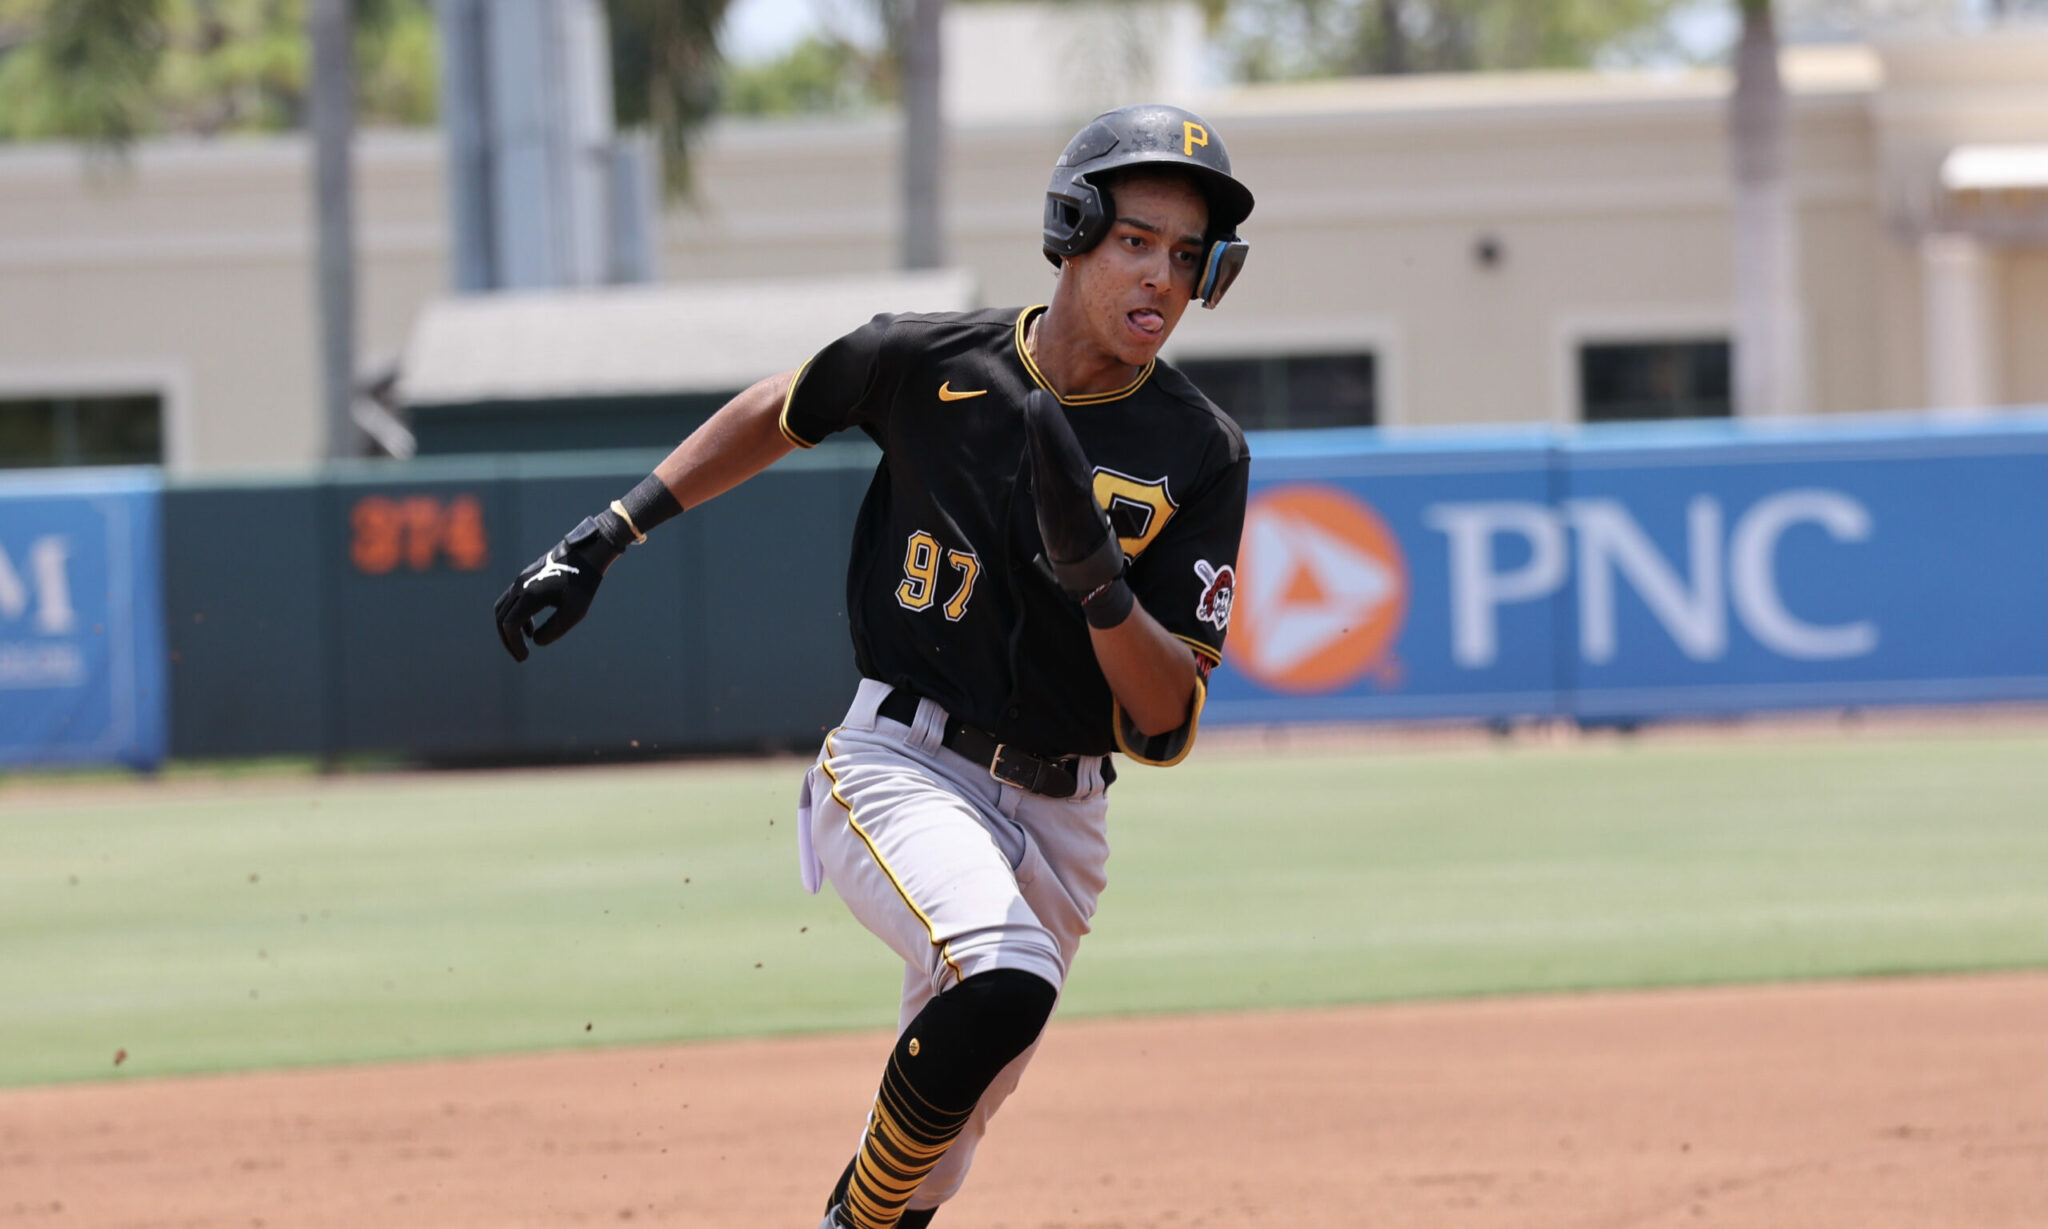 First Impressions on the Pirates in the Florida Complex League